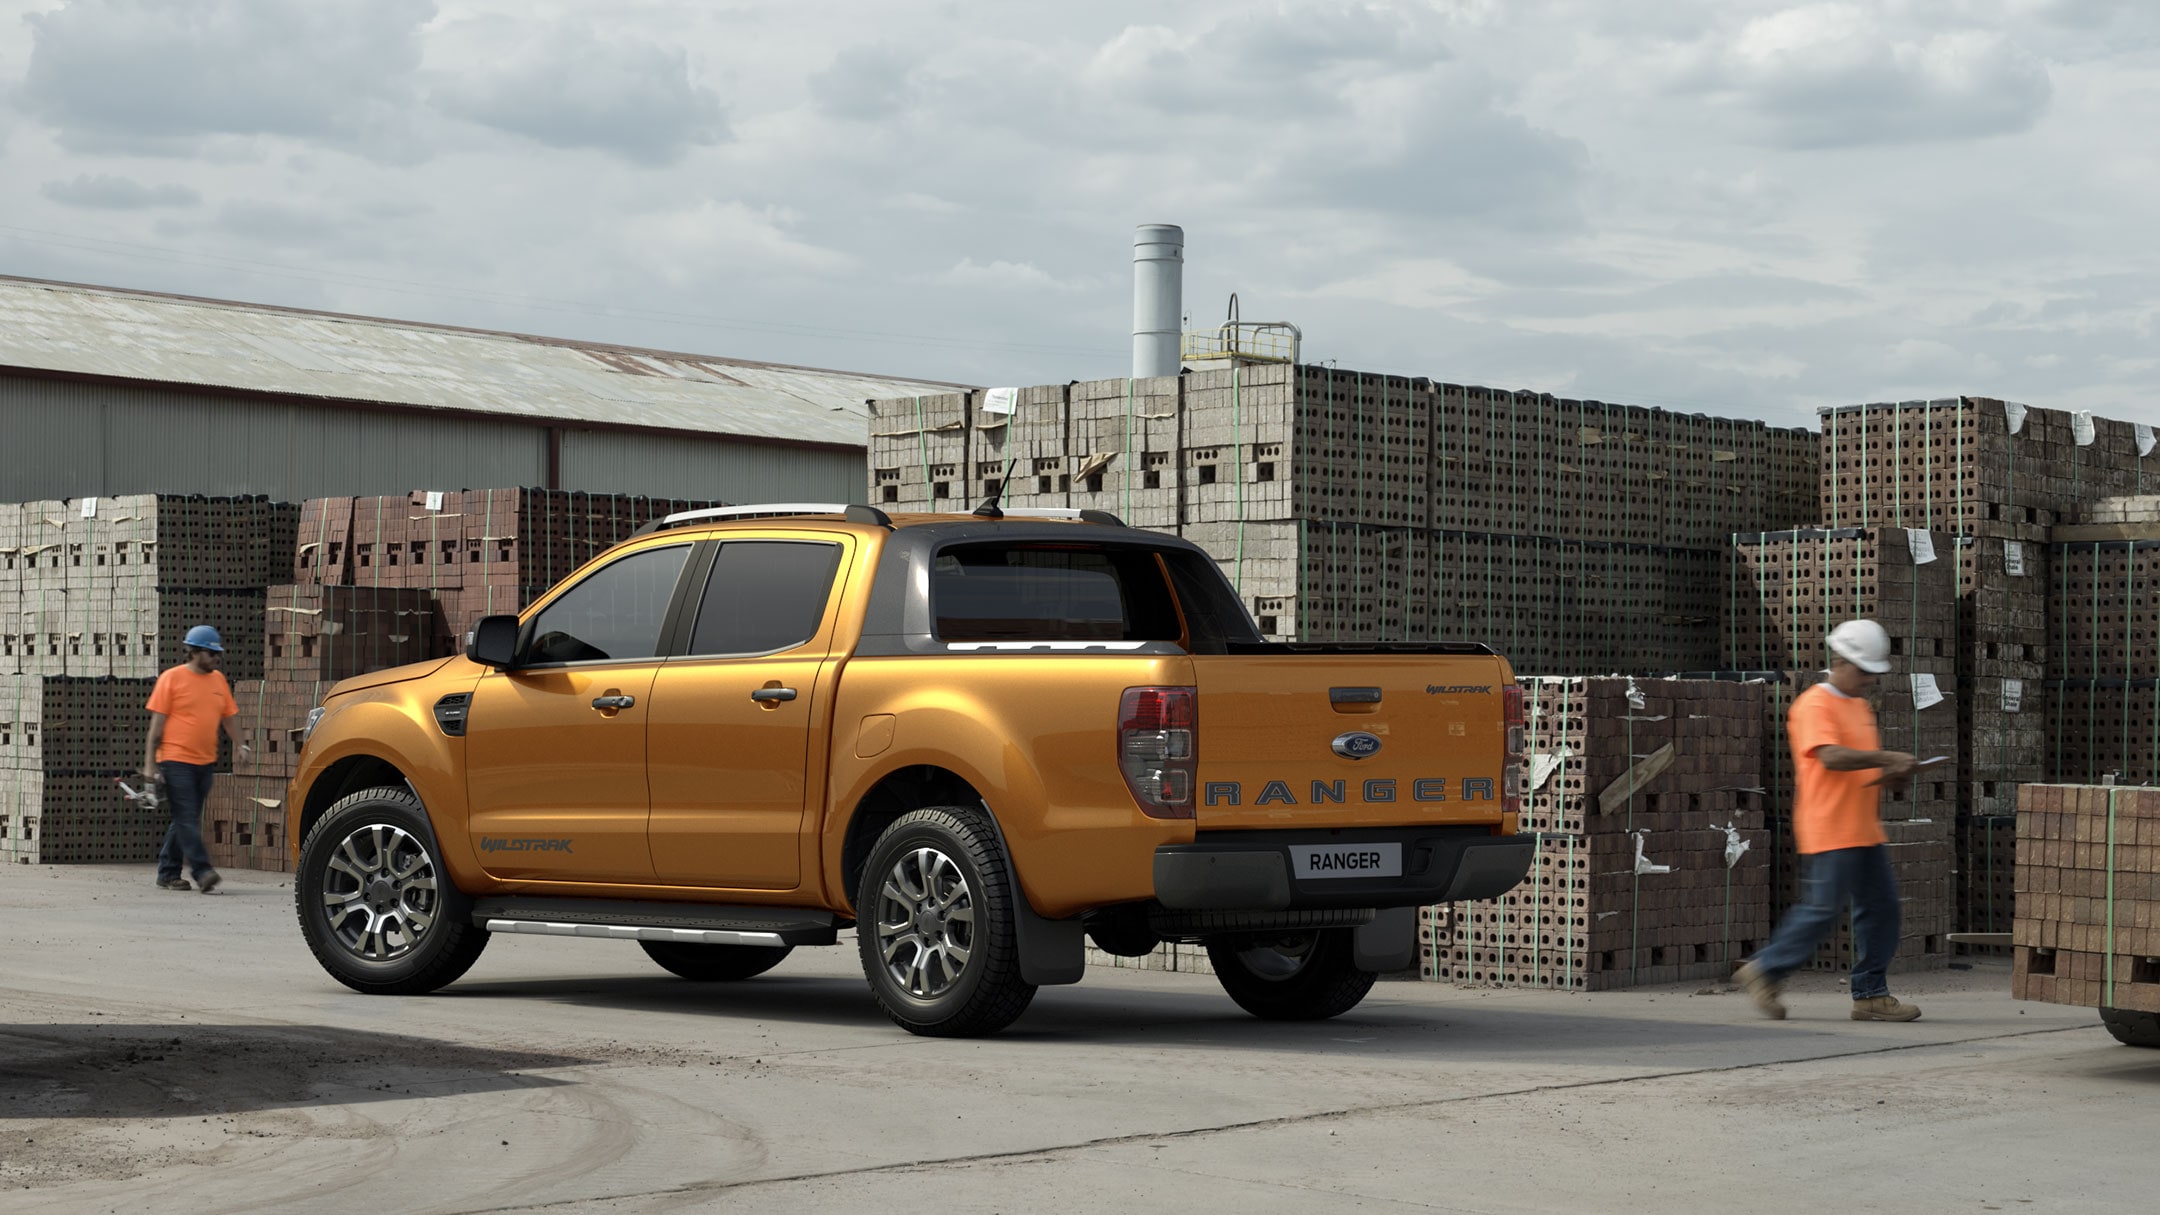 Rear shot of an orange Ford Ranger Wildtrak parked at a building site with two workers